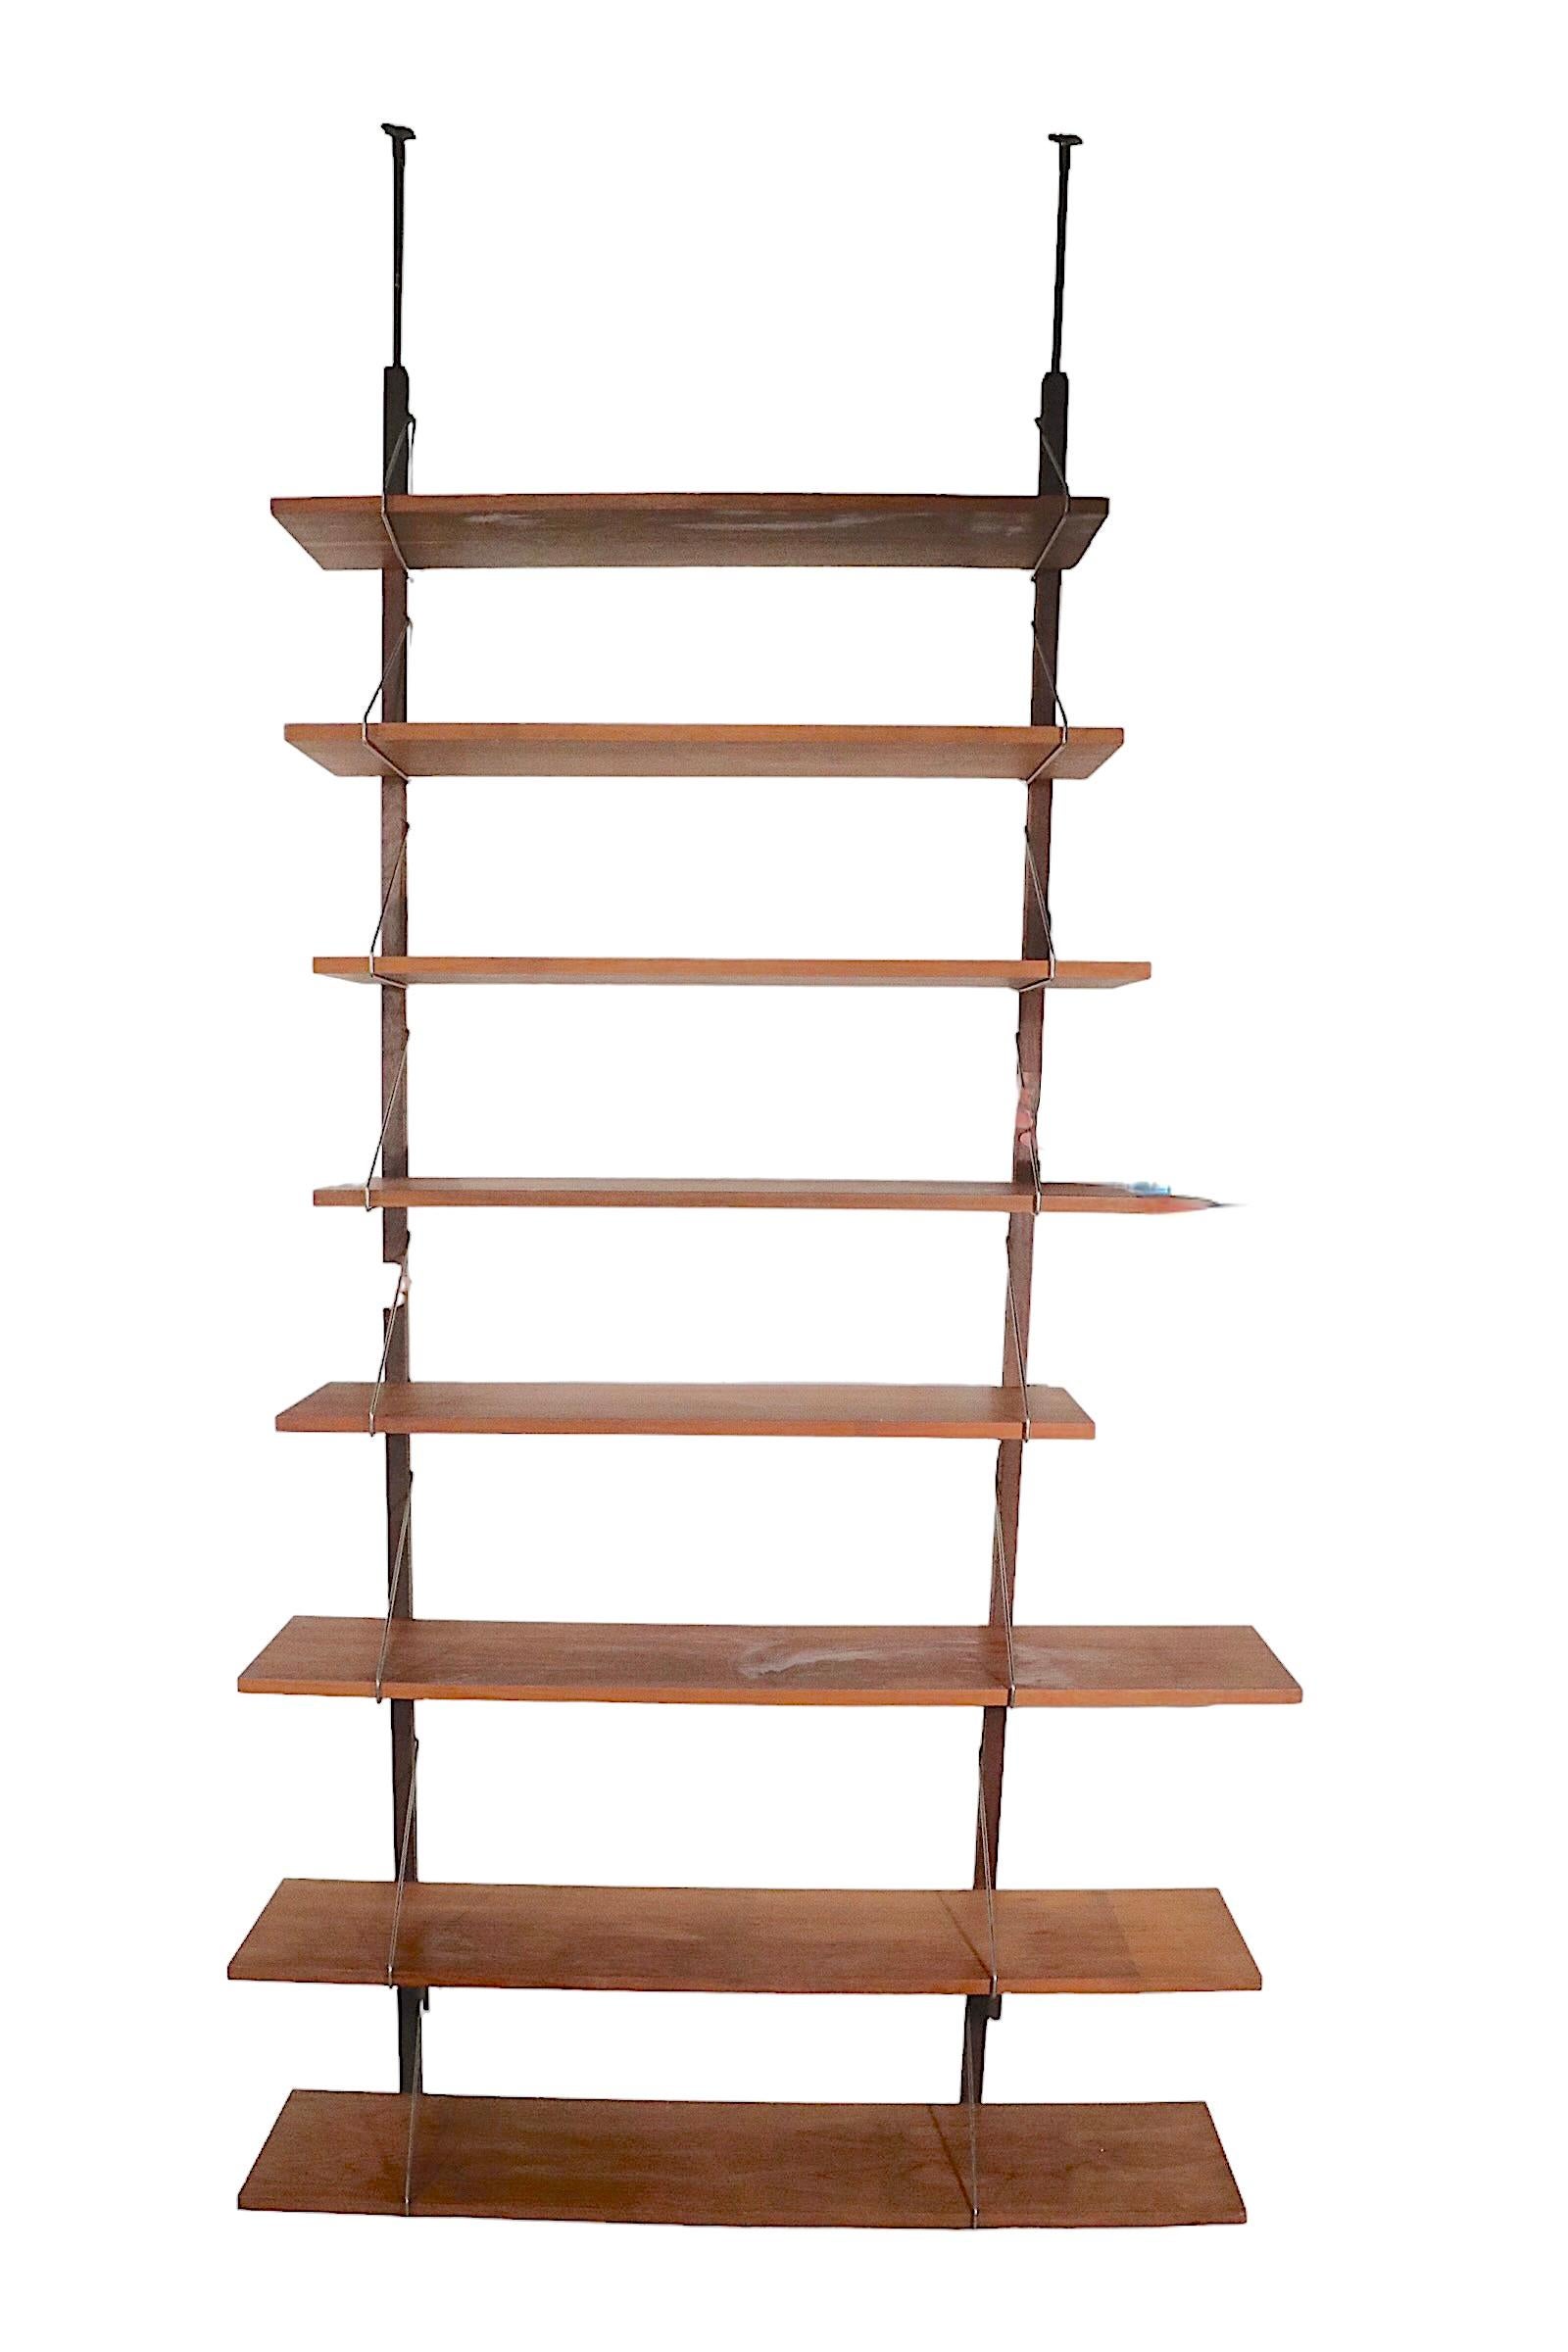 Danish Mid Century Wall Unit with 8 Shelves, circa 1950 - 1960s For Sale 2